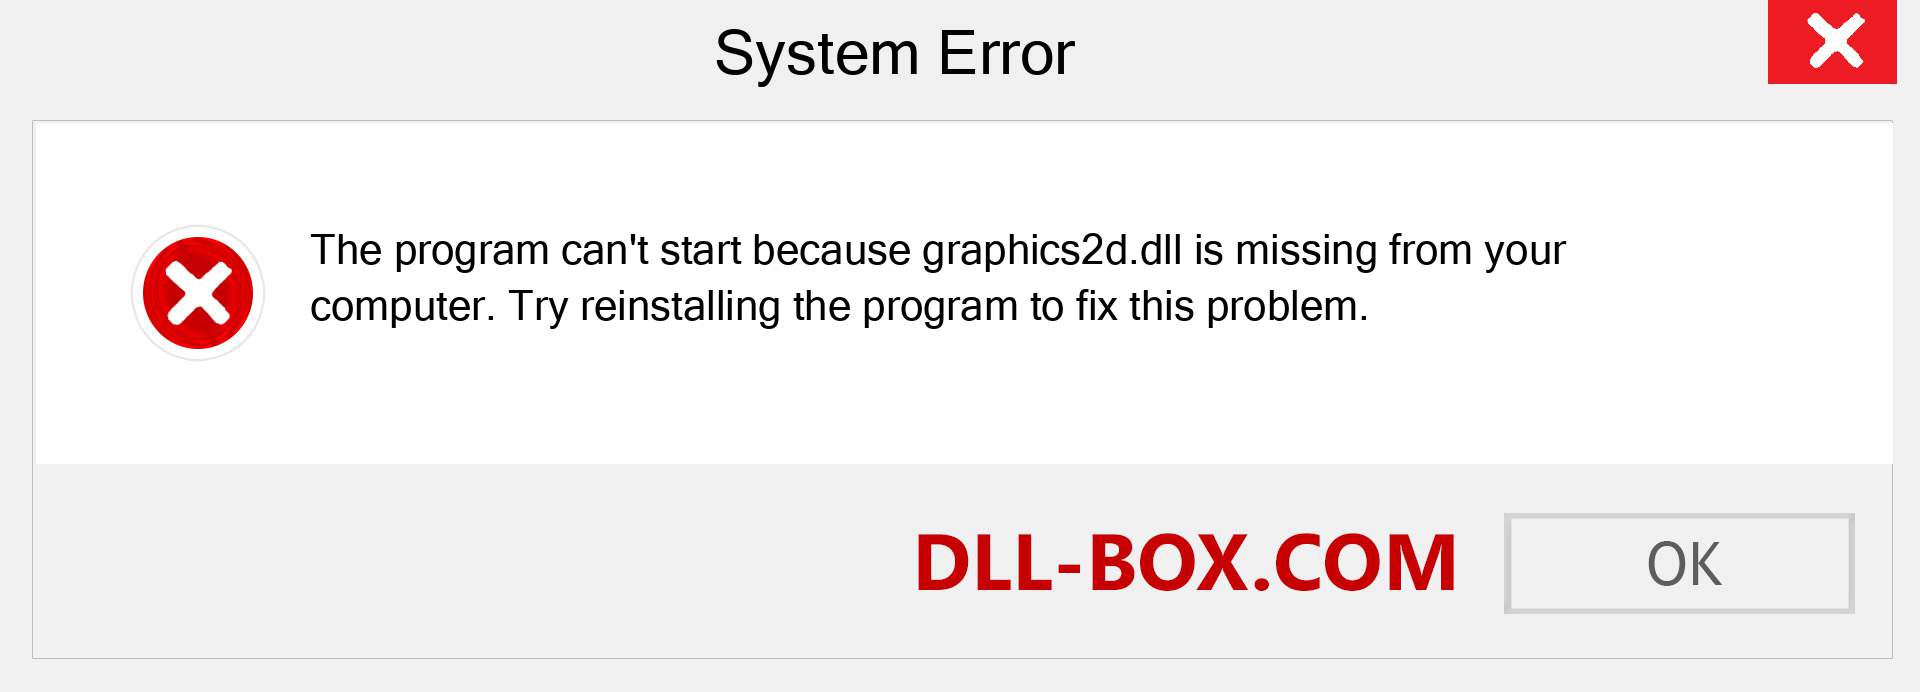  graphics2d.dll file is missing?. Download for Windows 7, 8, 10 - Fix  graphics2d dll Missing Error on Windows, photos, images